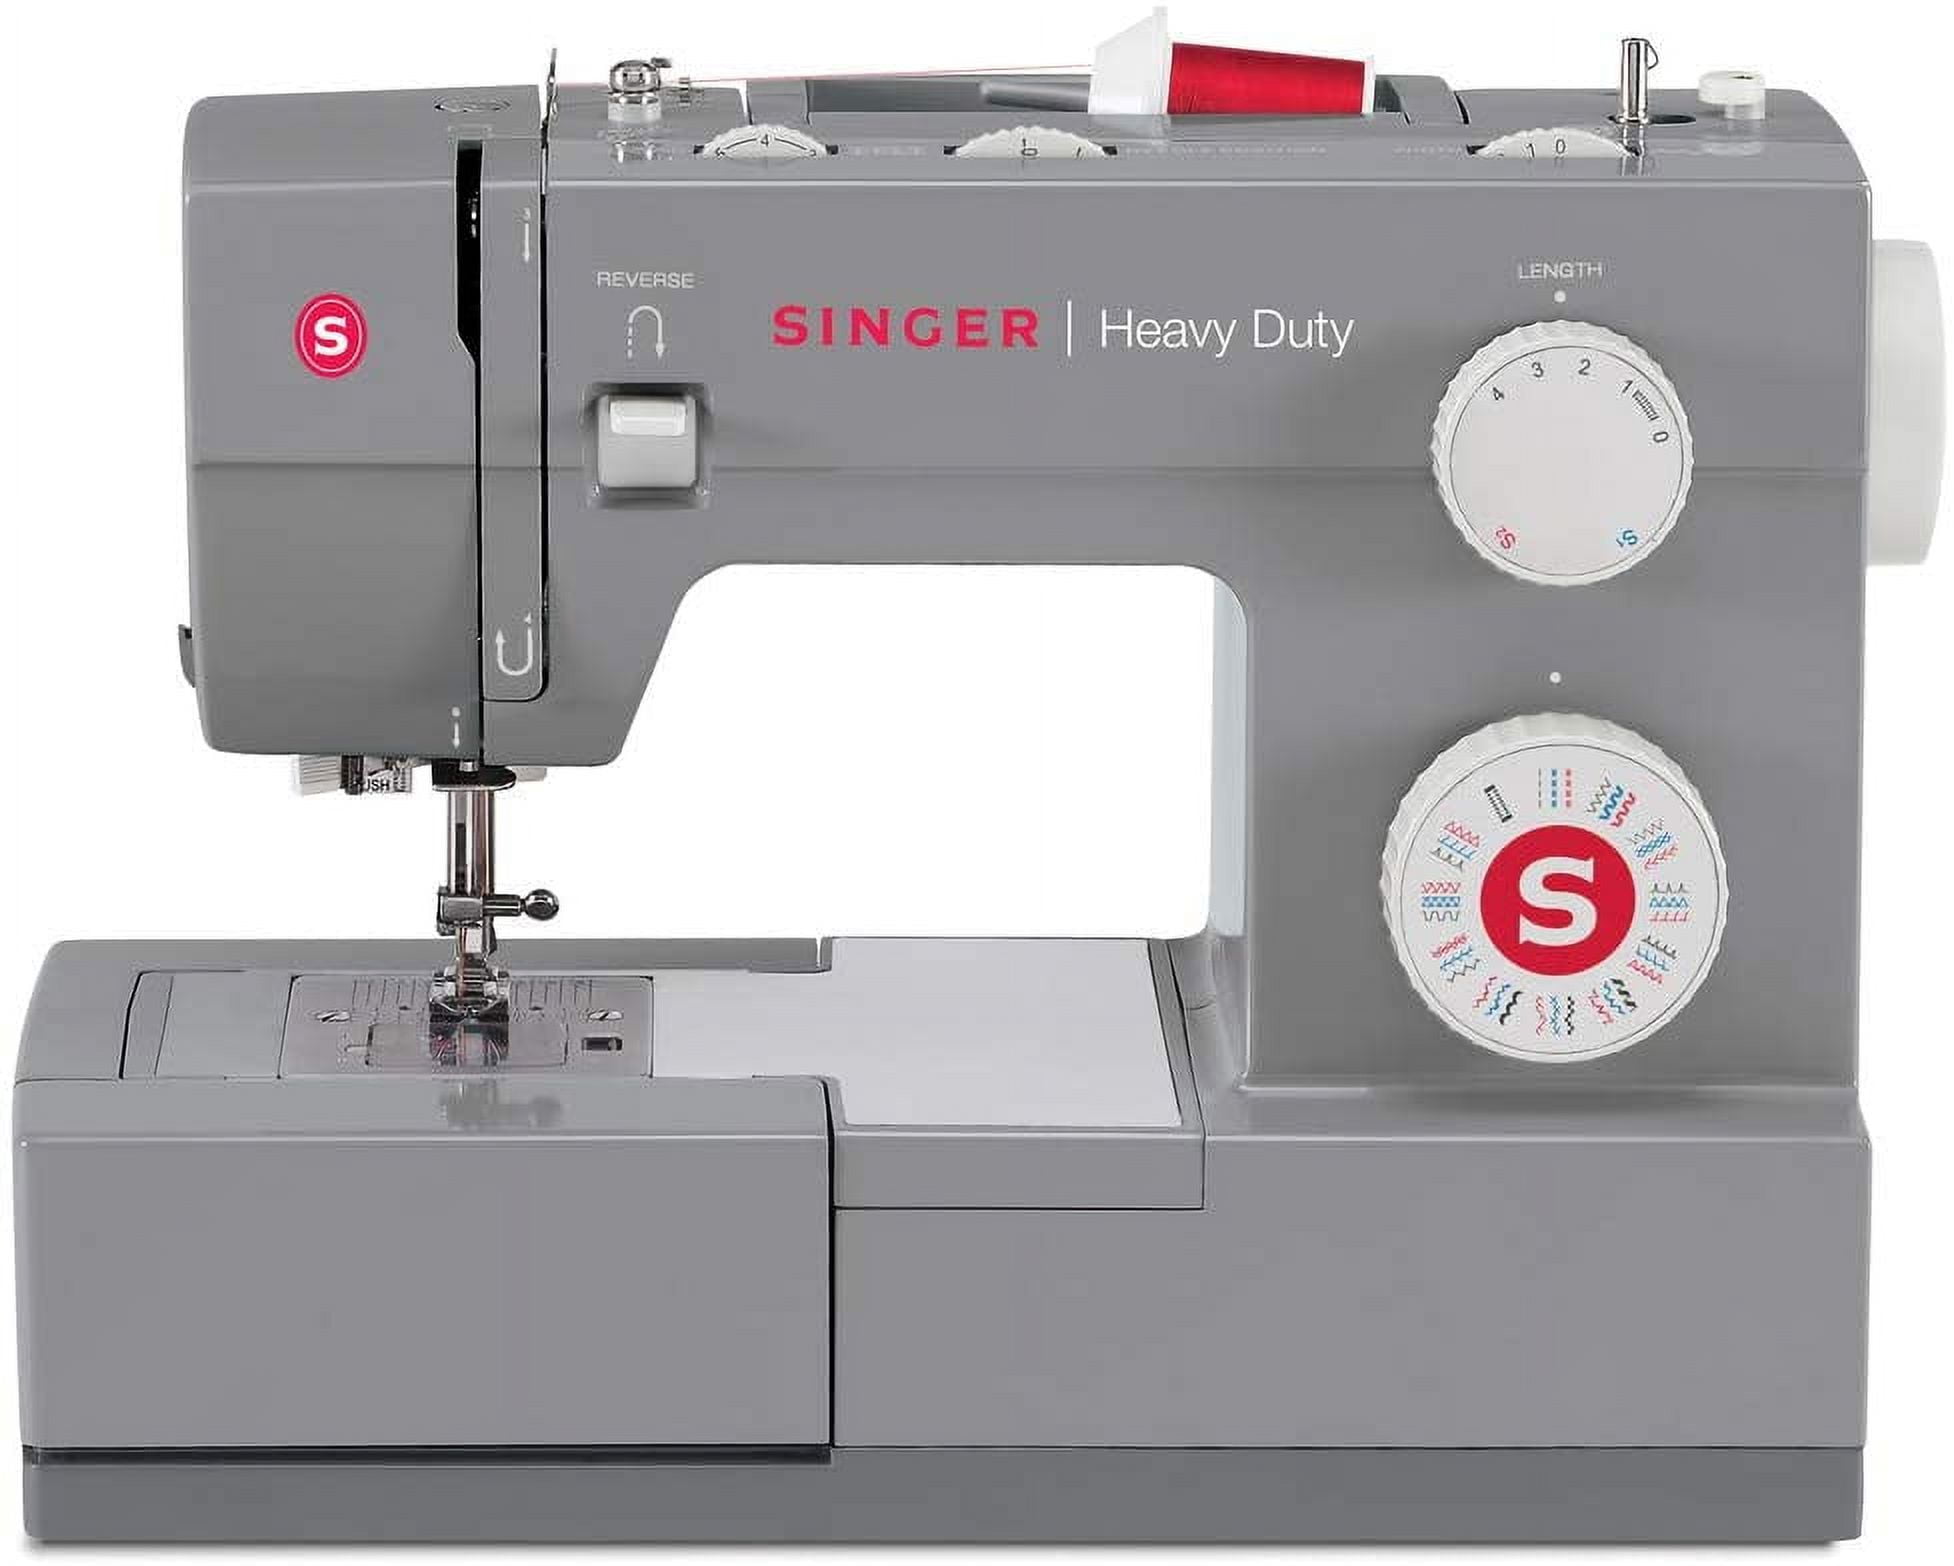 SINGER Heavy Duty 4432 110 Stitch Applications, Metal Frame, Stainless  Steel Bedplate Made Easy Sewing Machine, Gray